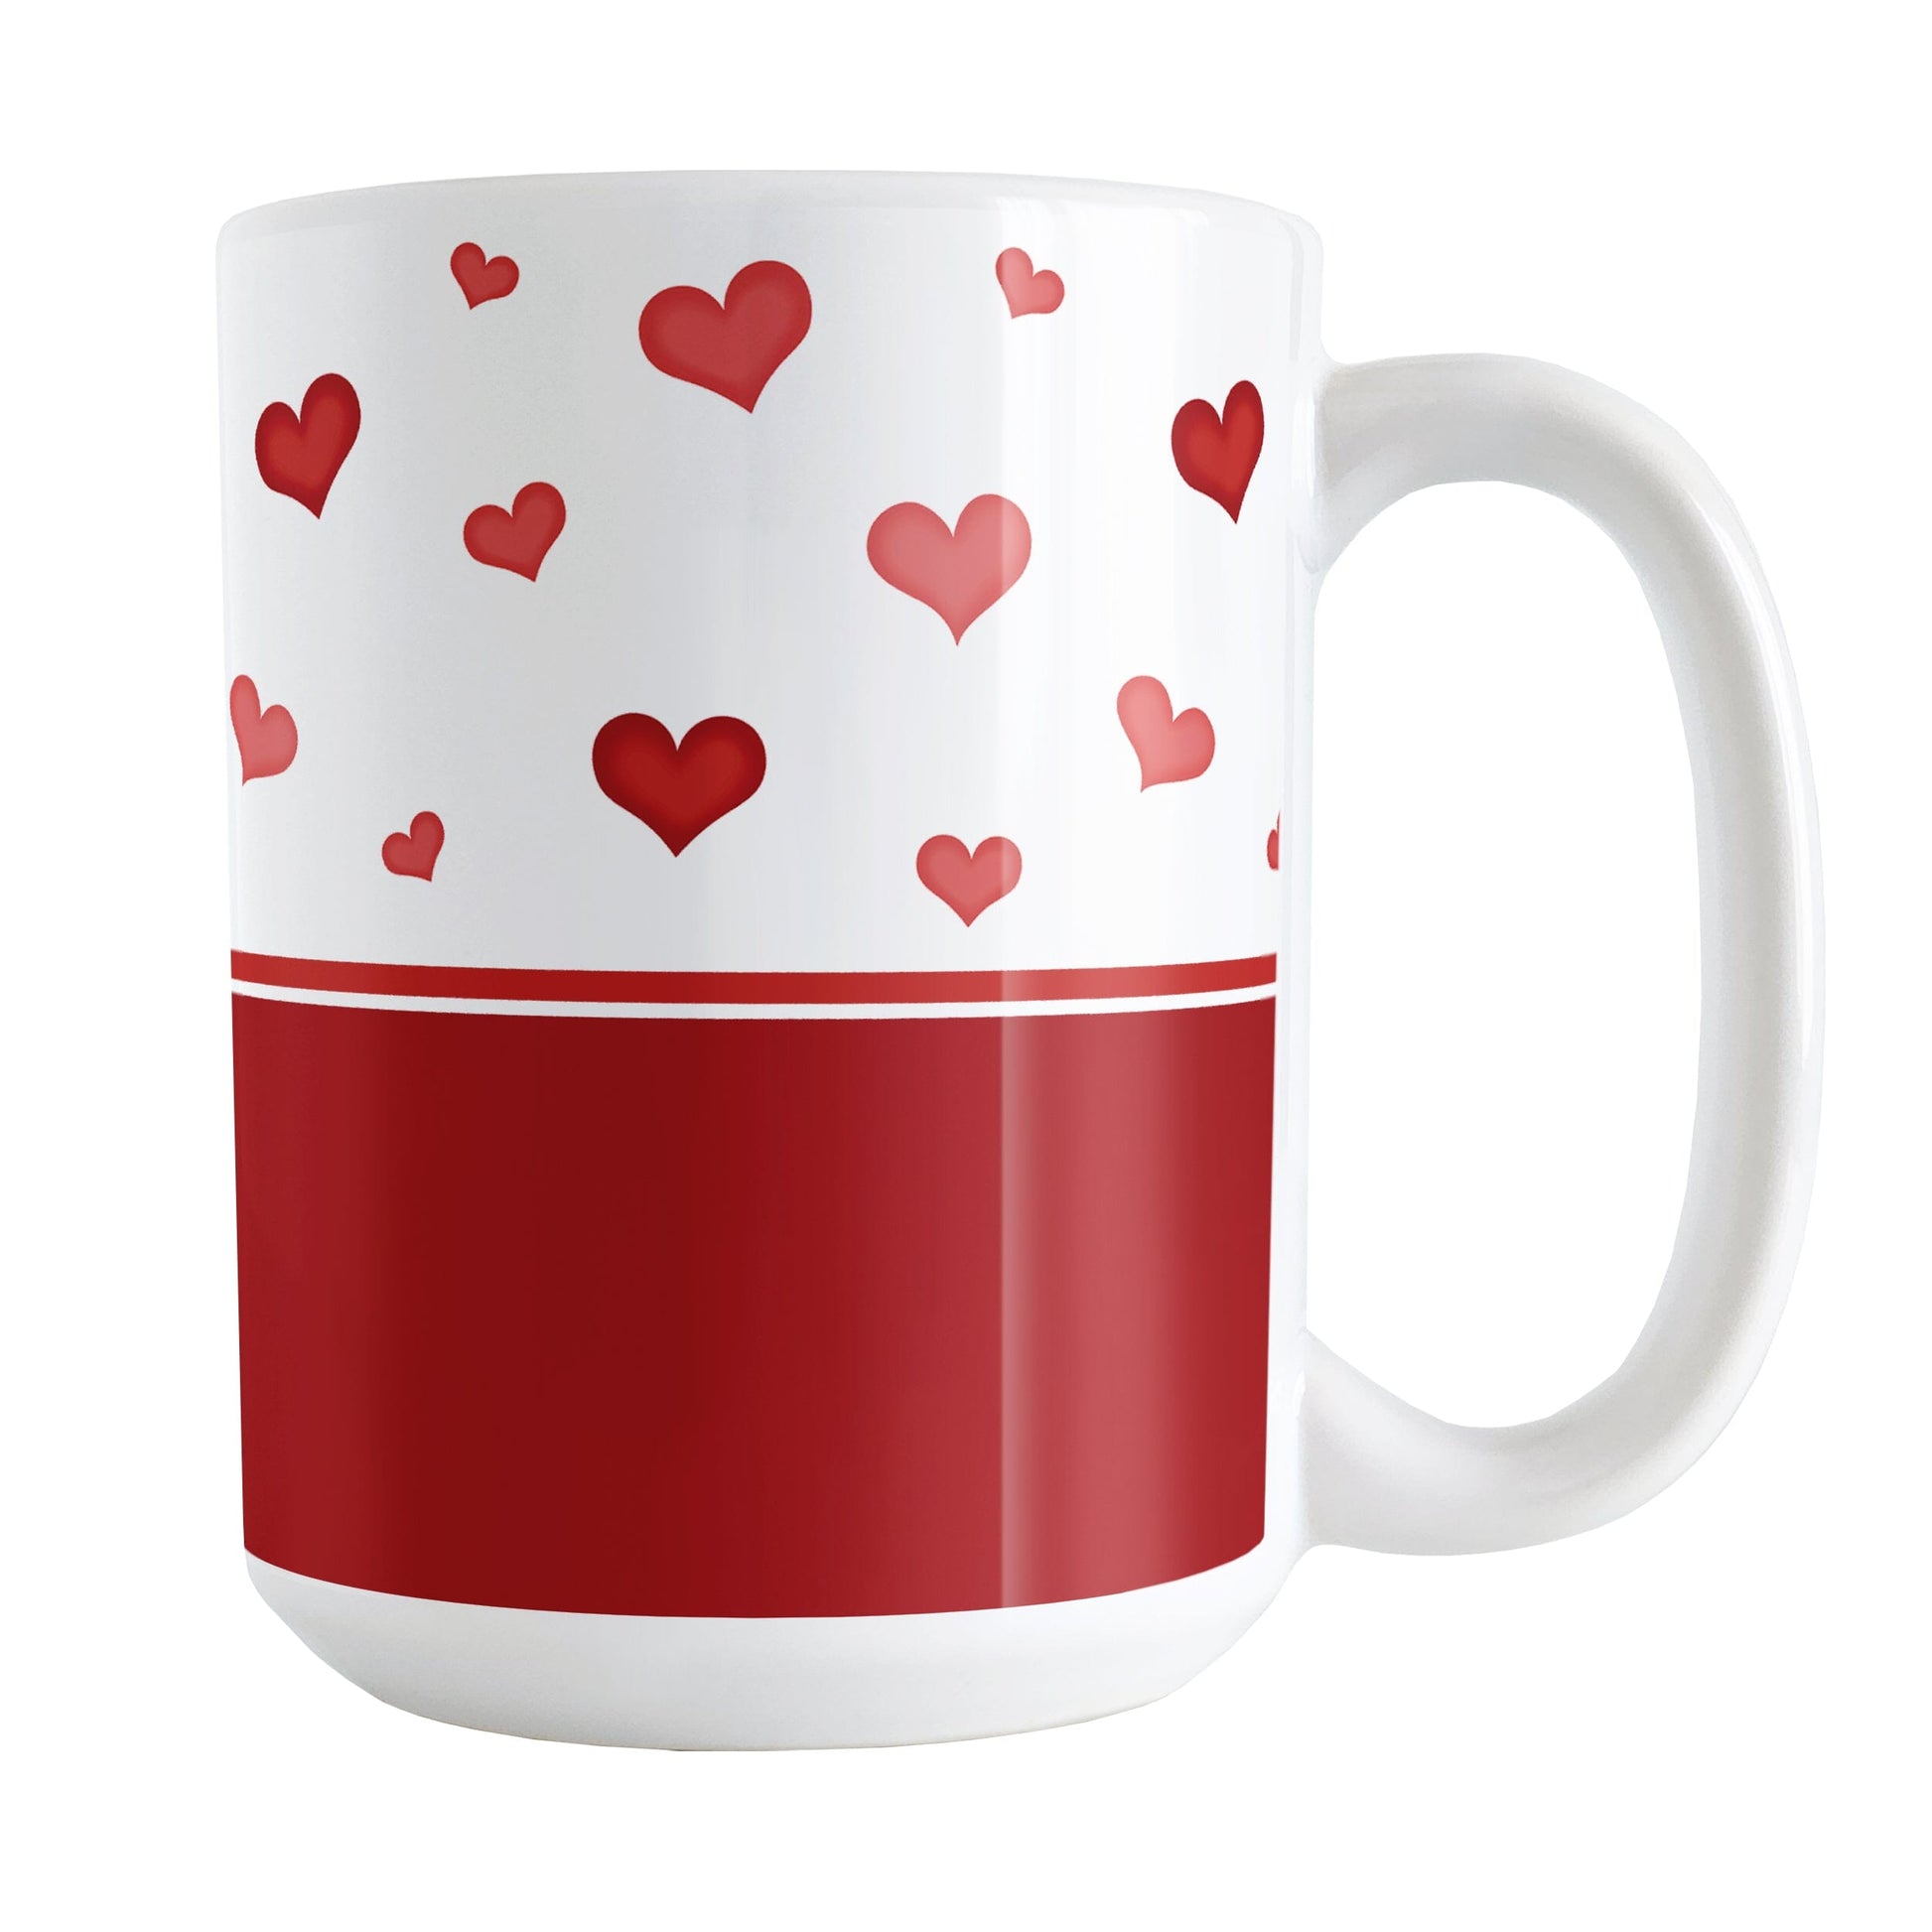 Cute Hearts and Red Mug (15oz) at Amy's Coffee Mugs. A ceramic coffee mug designed with a print of small cute hand-drawn red hearts in different shades of red in a pattern along the top and a tall darker red stripe along the bottom that wraps around the mug to the handle.